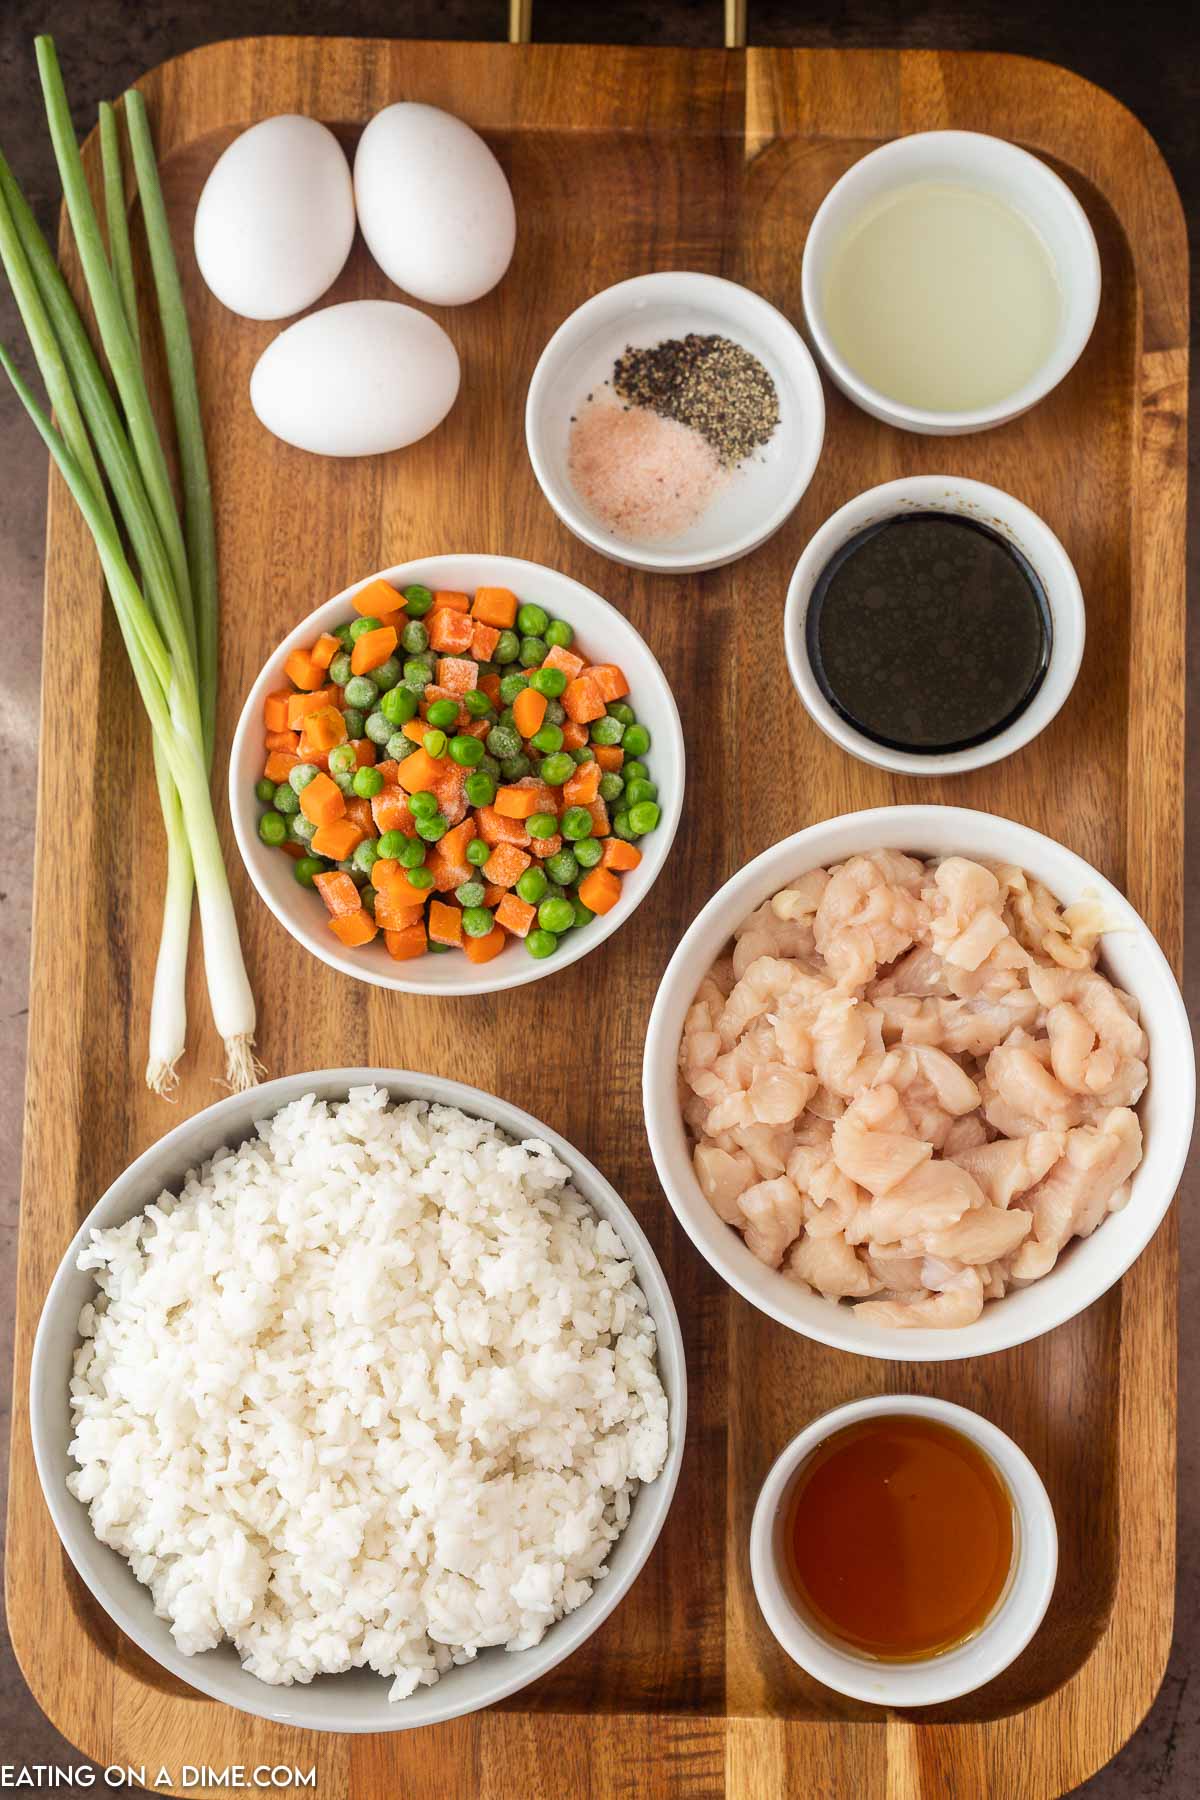 Ingredients needed - chicken breast, oil, frozen vegetables, eggs, white rice, soy sauce, salt and pepper, green onions